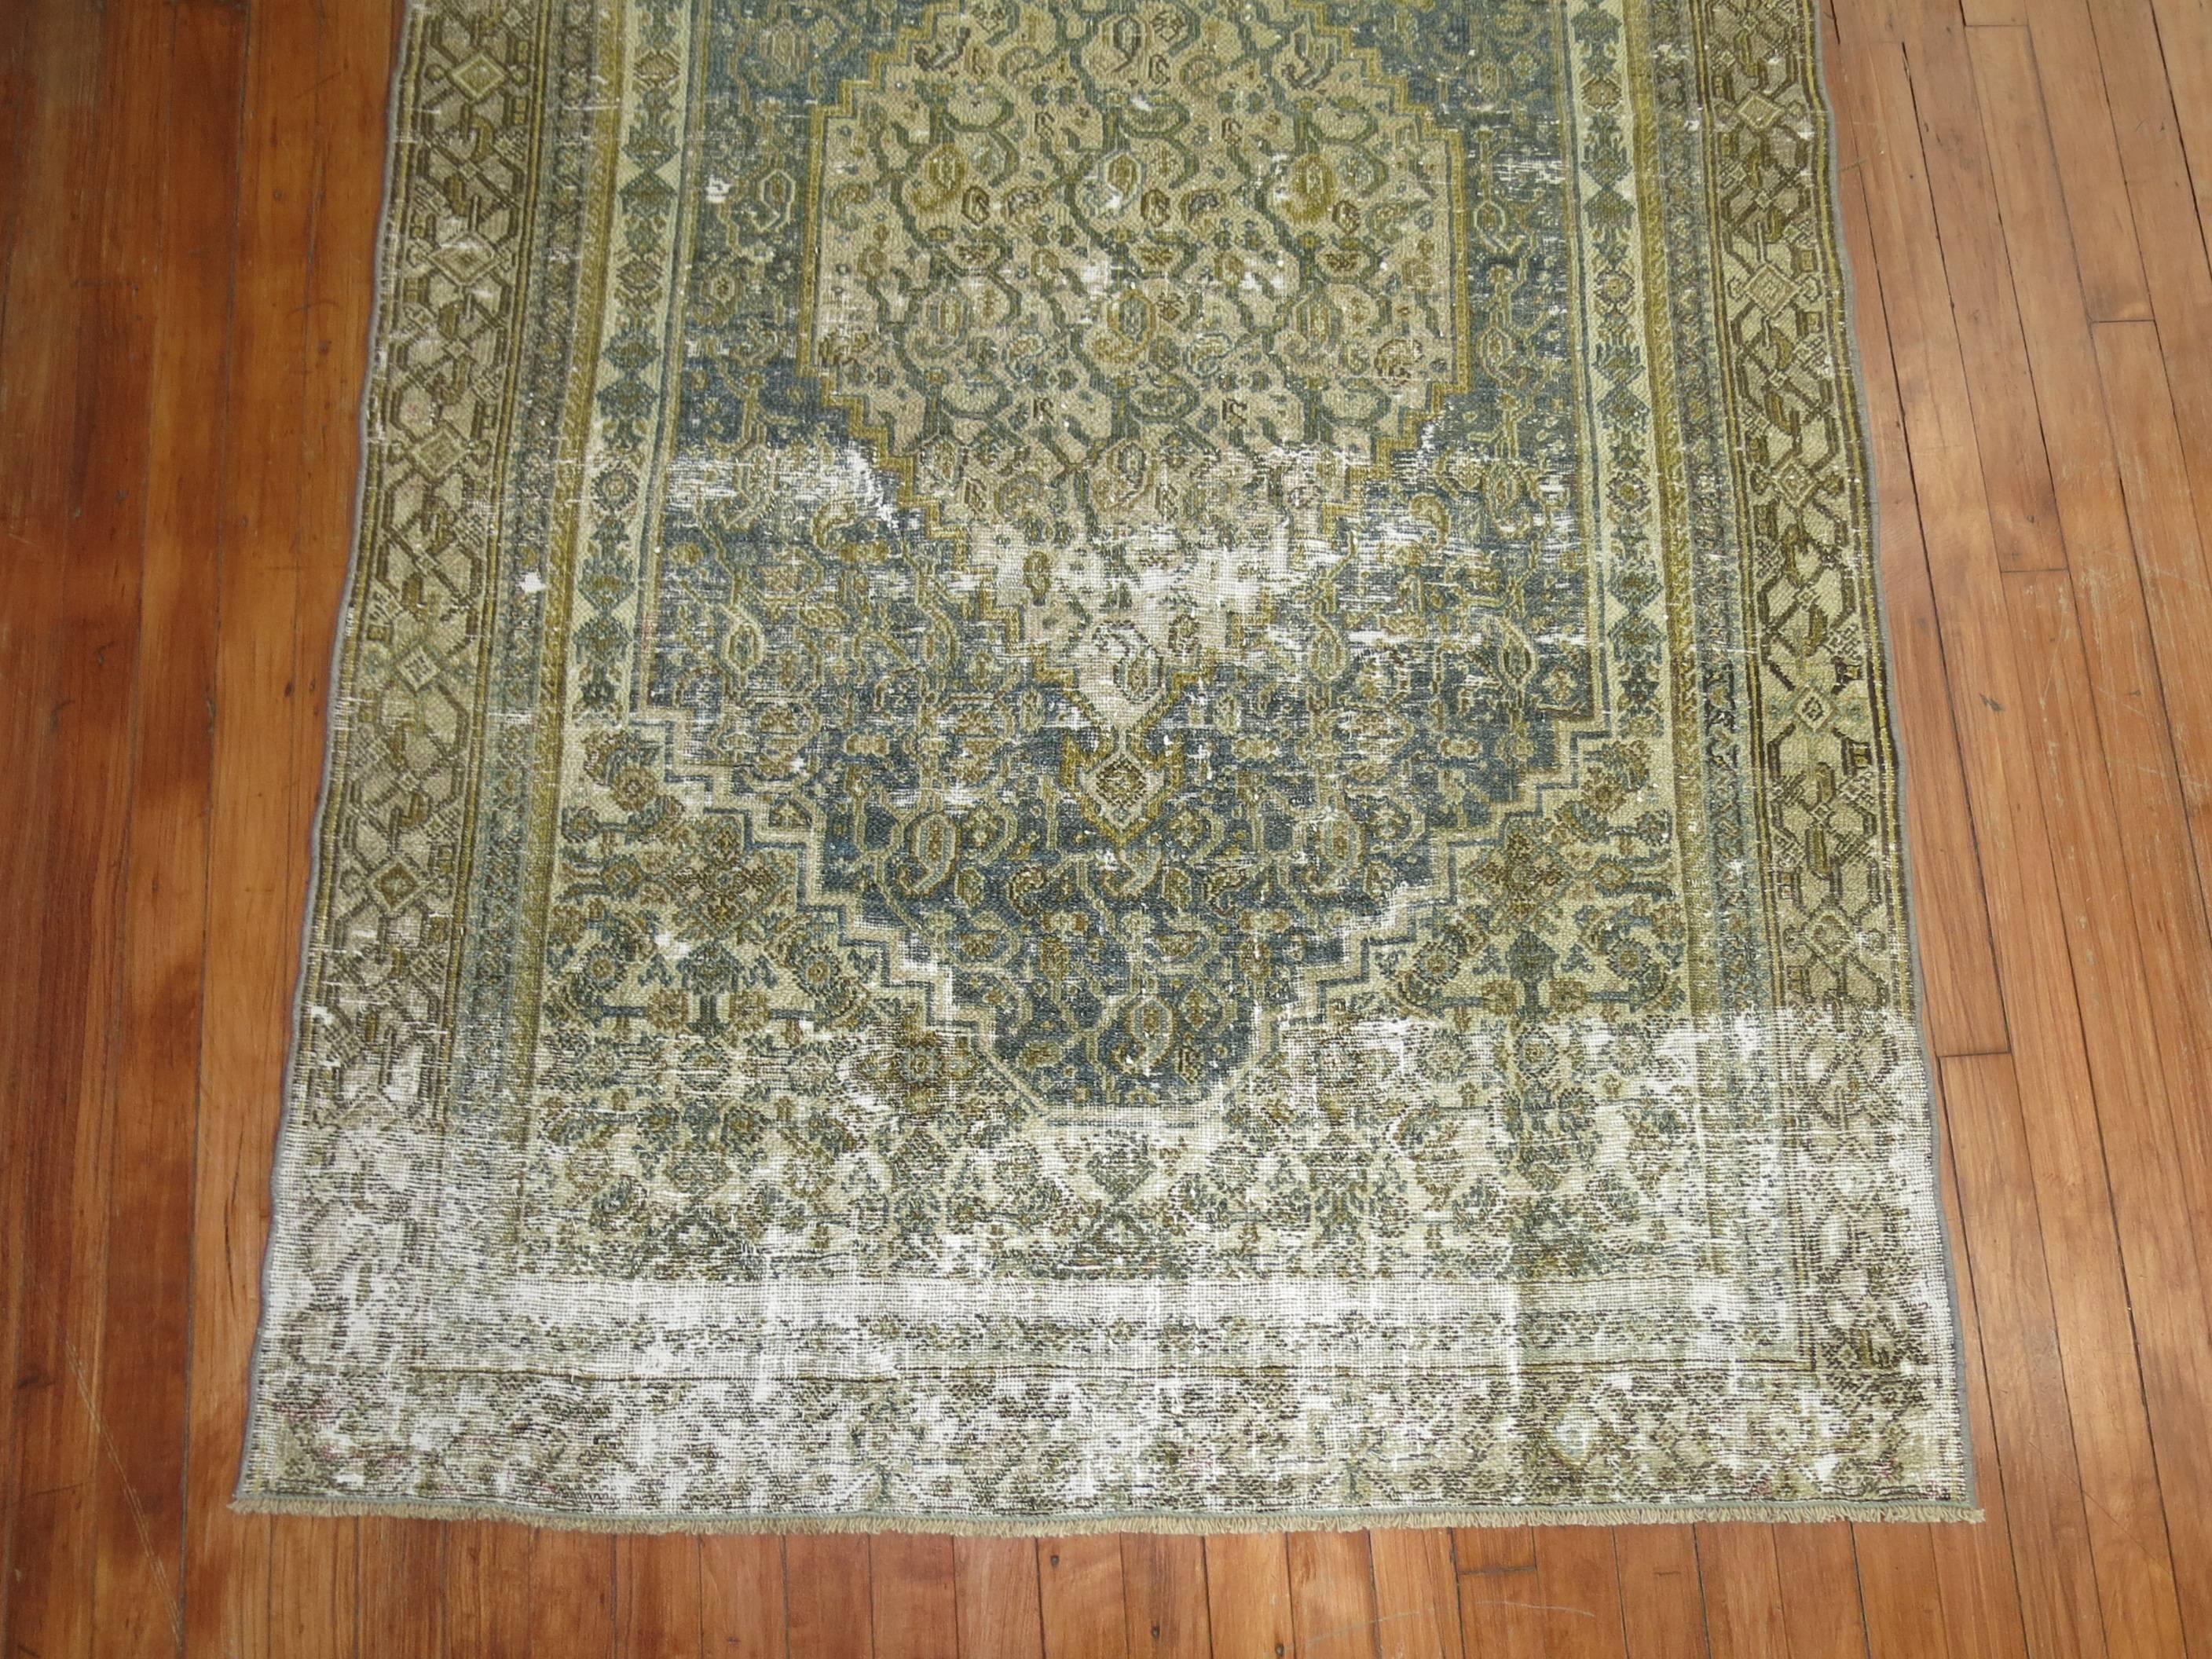 A perfectly worn Persian geometric Bibikabad rug in green, gray and gold.